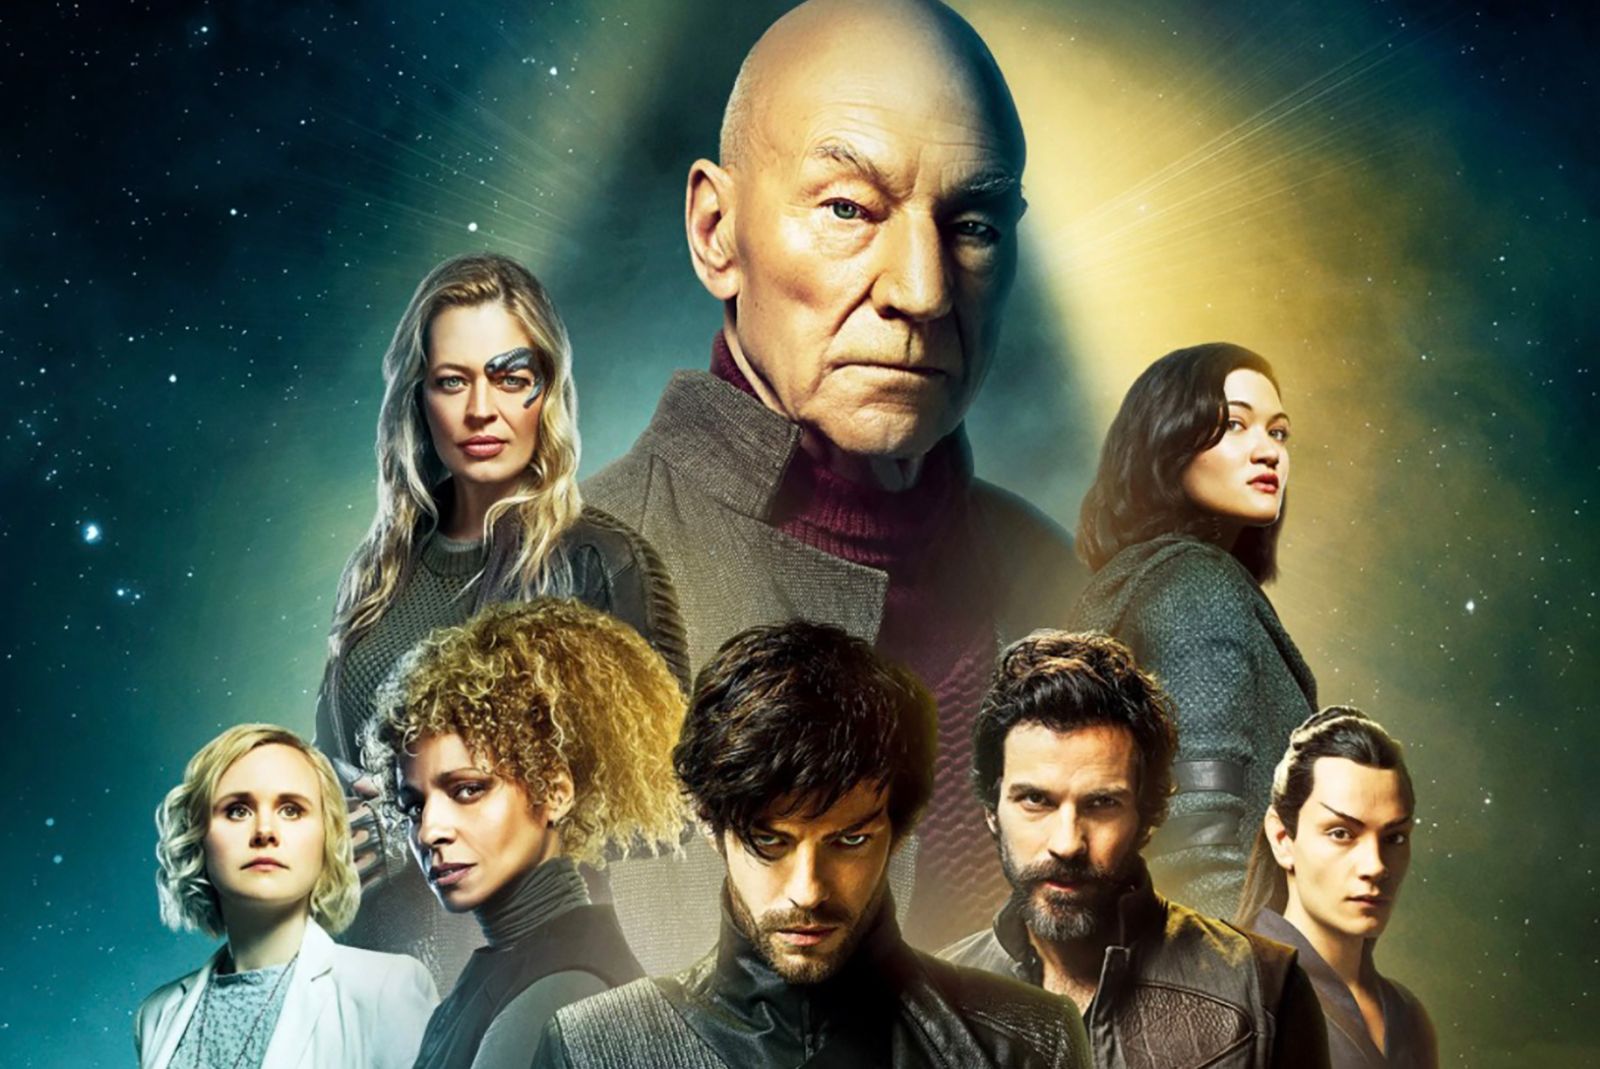 Star Trek Picard season 2: Release date, cast, trailers, and rumours photo 2